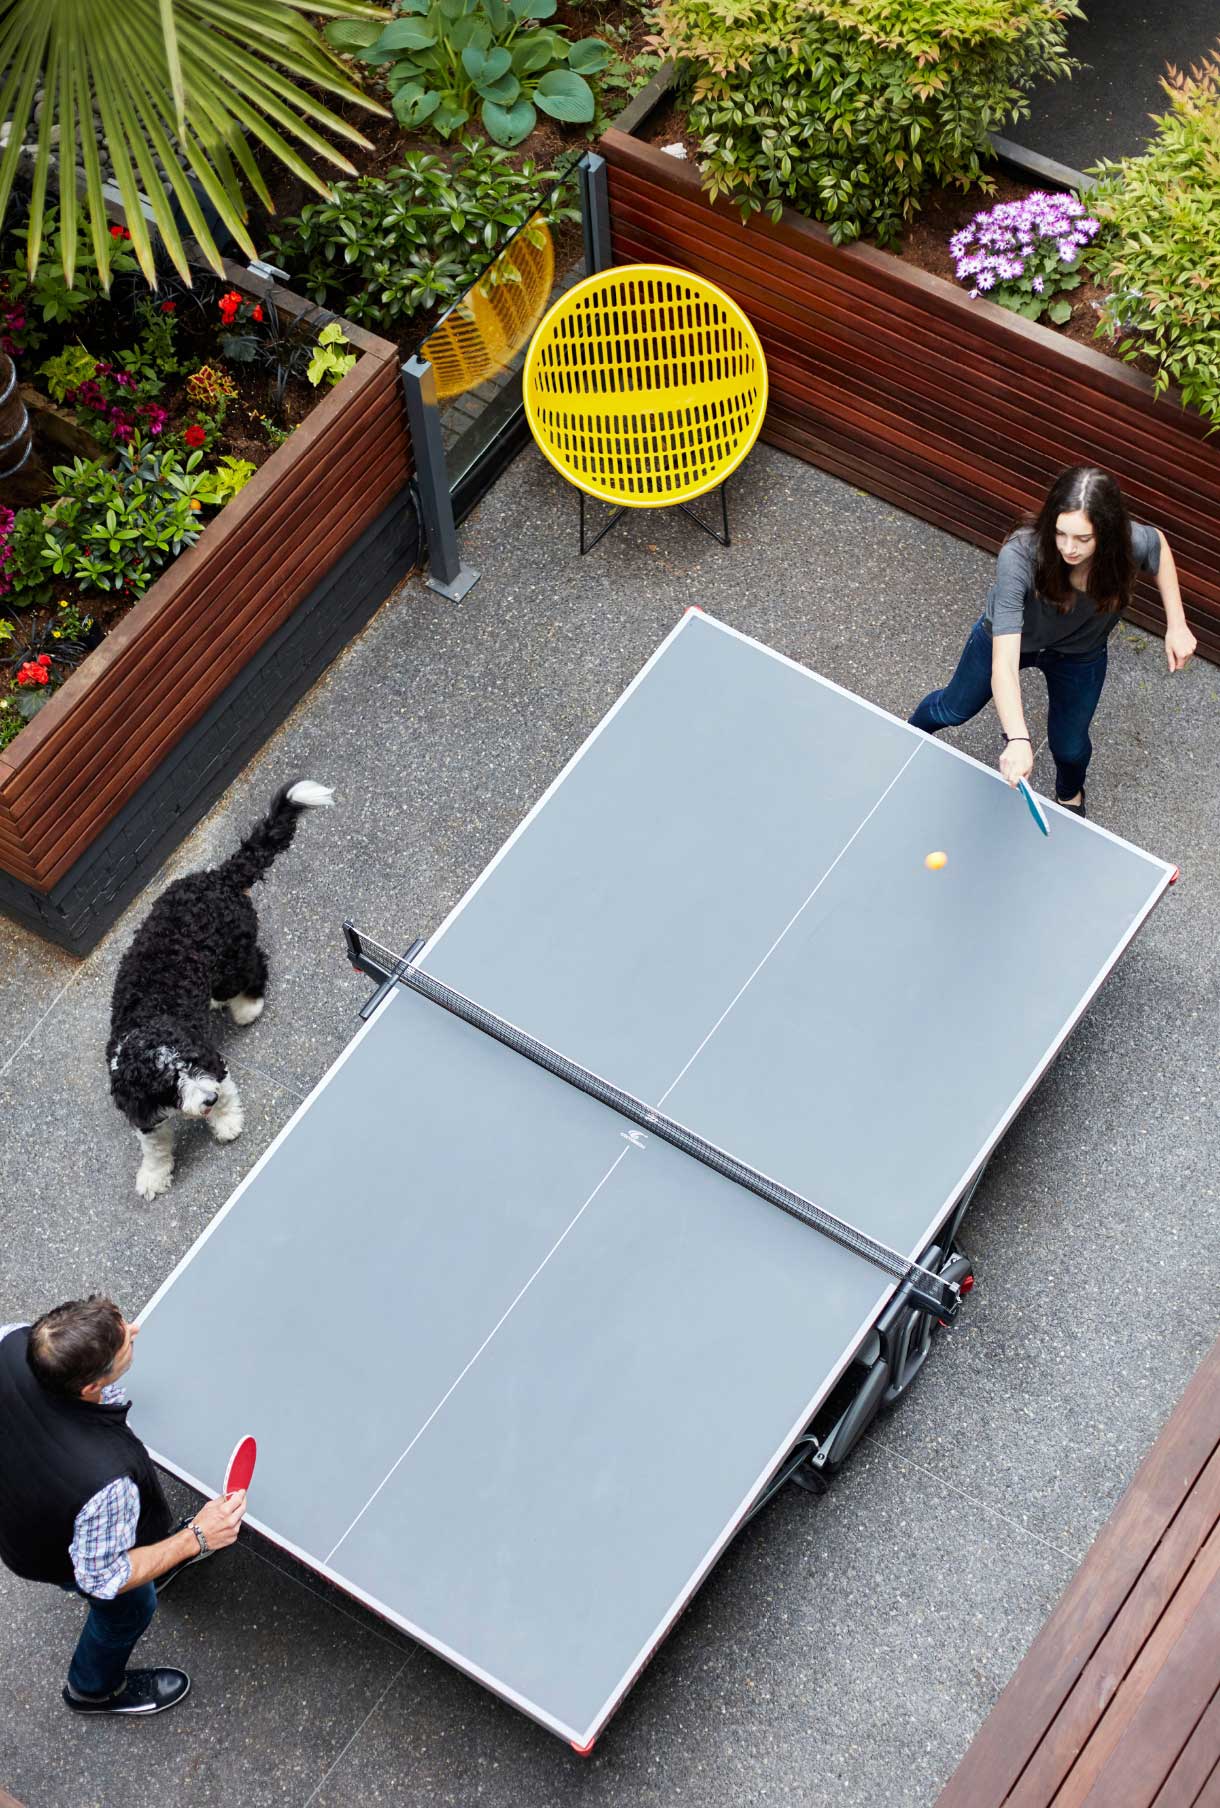 The Burrard inner courtyard ping pong table